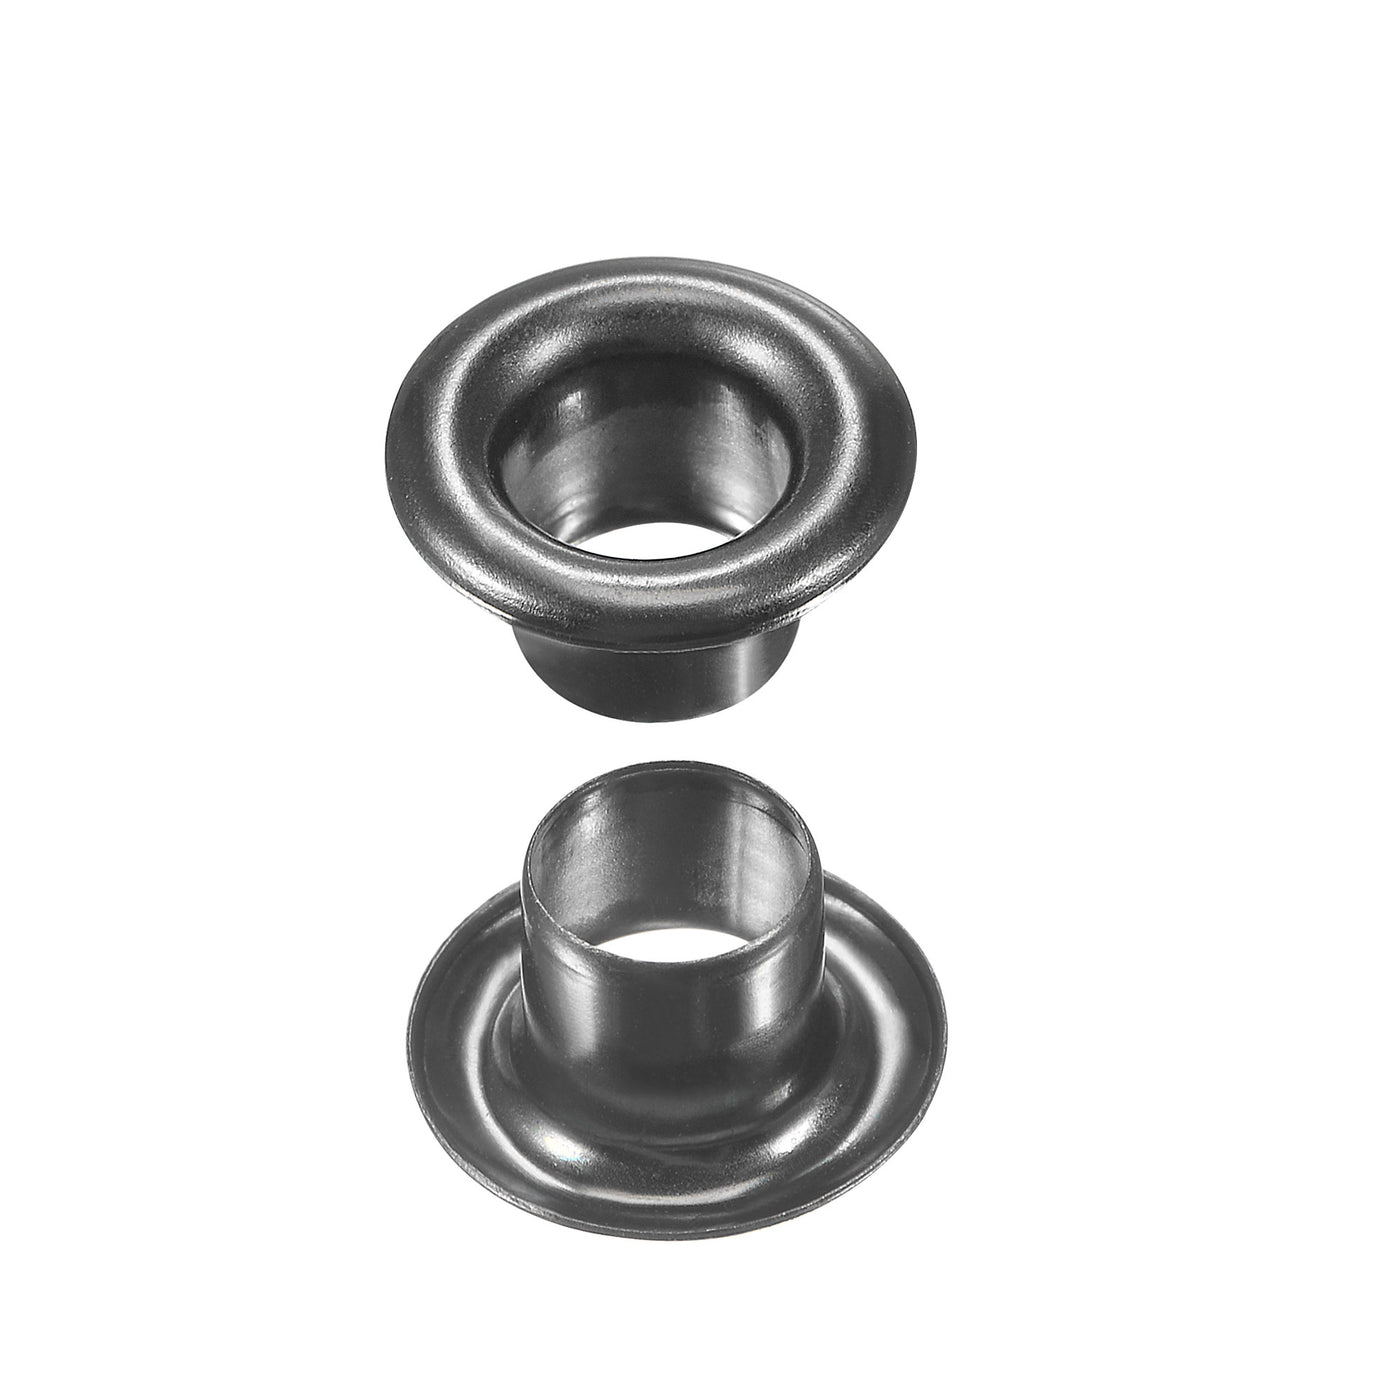 uxcell Uxcell Eyelet with Washer 9x4.5x4.7mm Copper Grommet Chrome Plated Black 200 Set